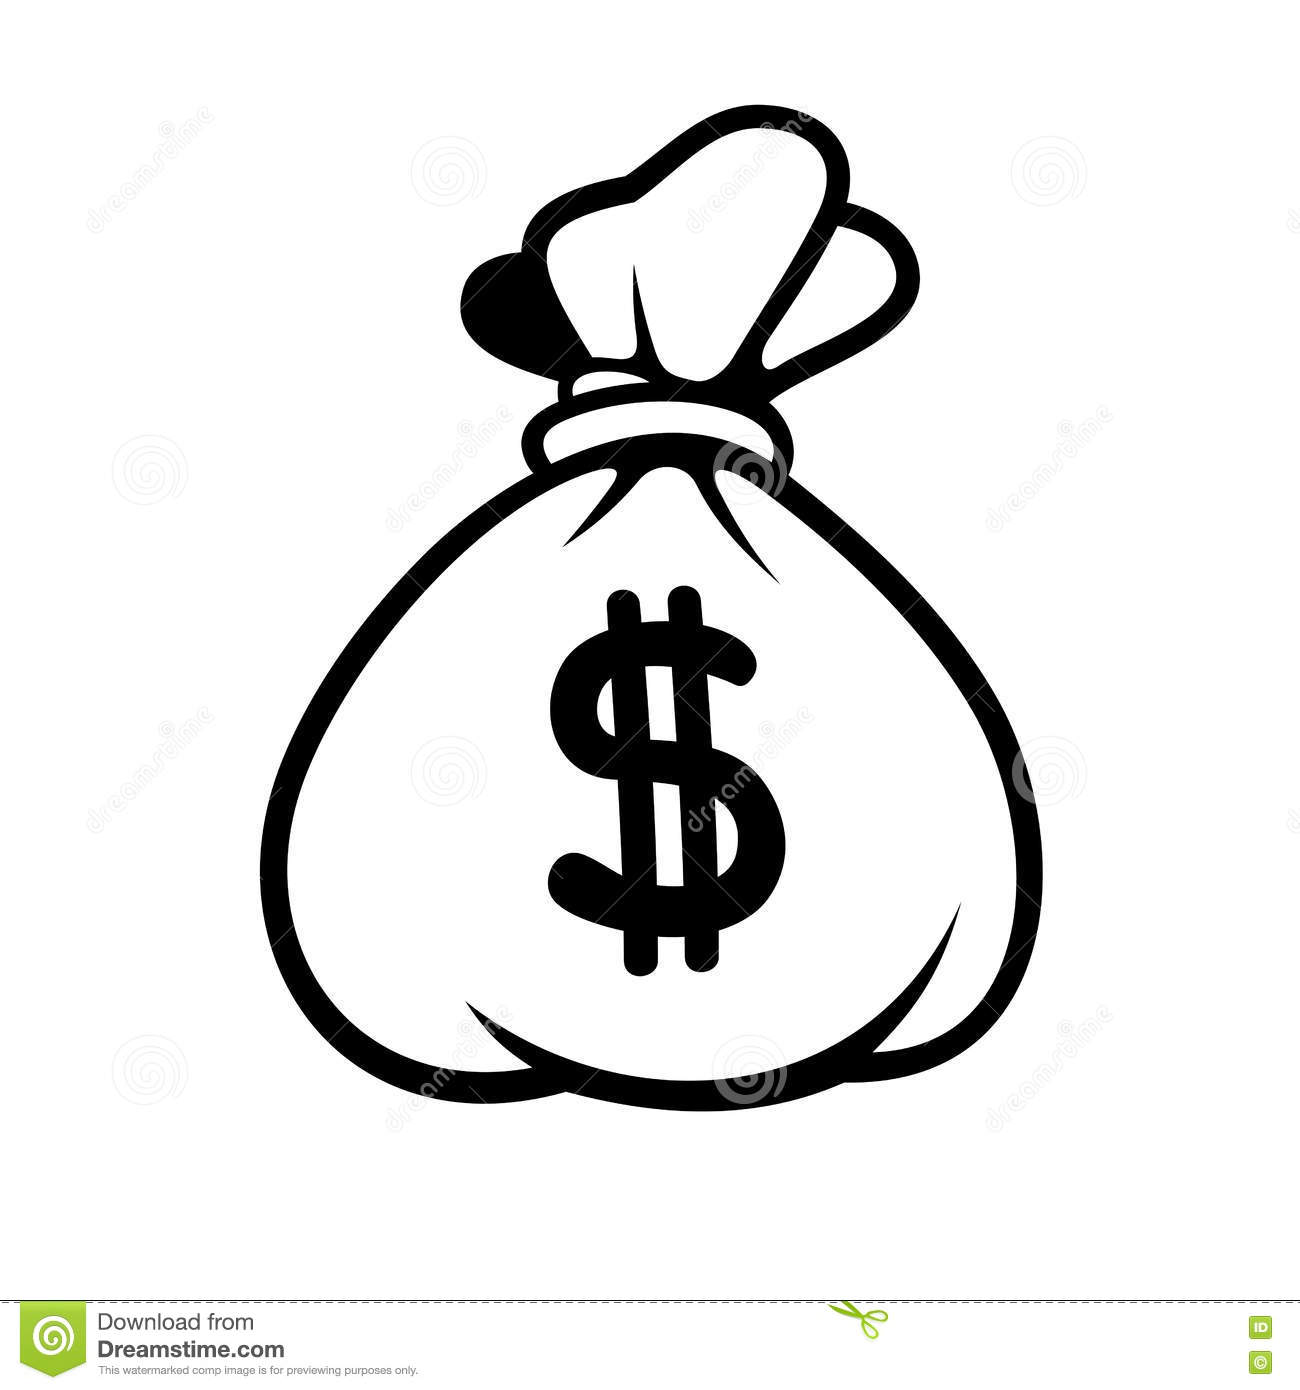 Dollar Money Icon With Bag On White Background  Vector Illustration